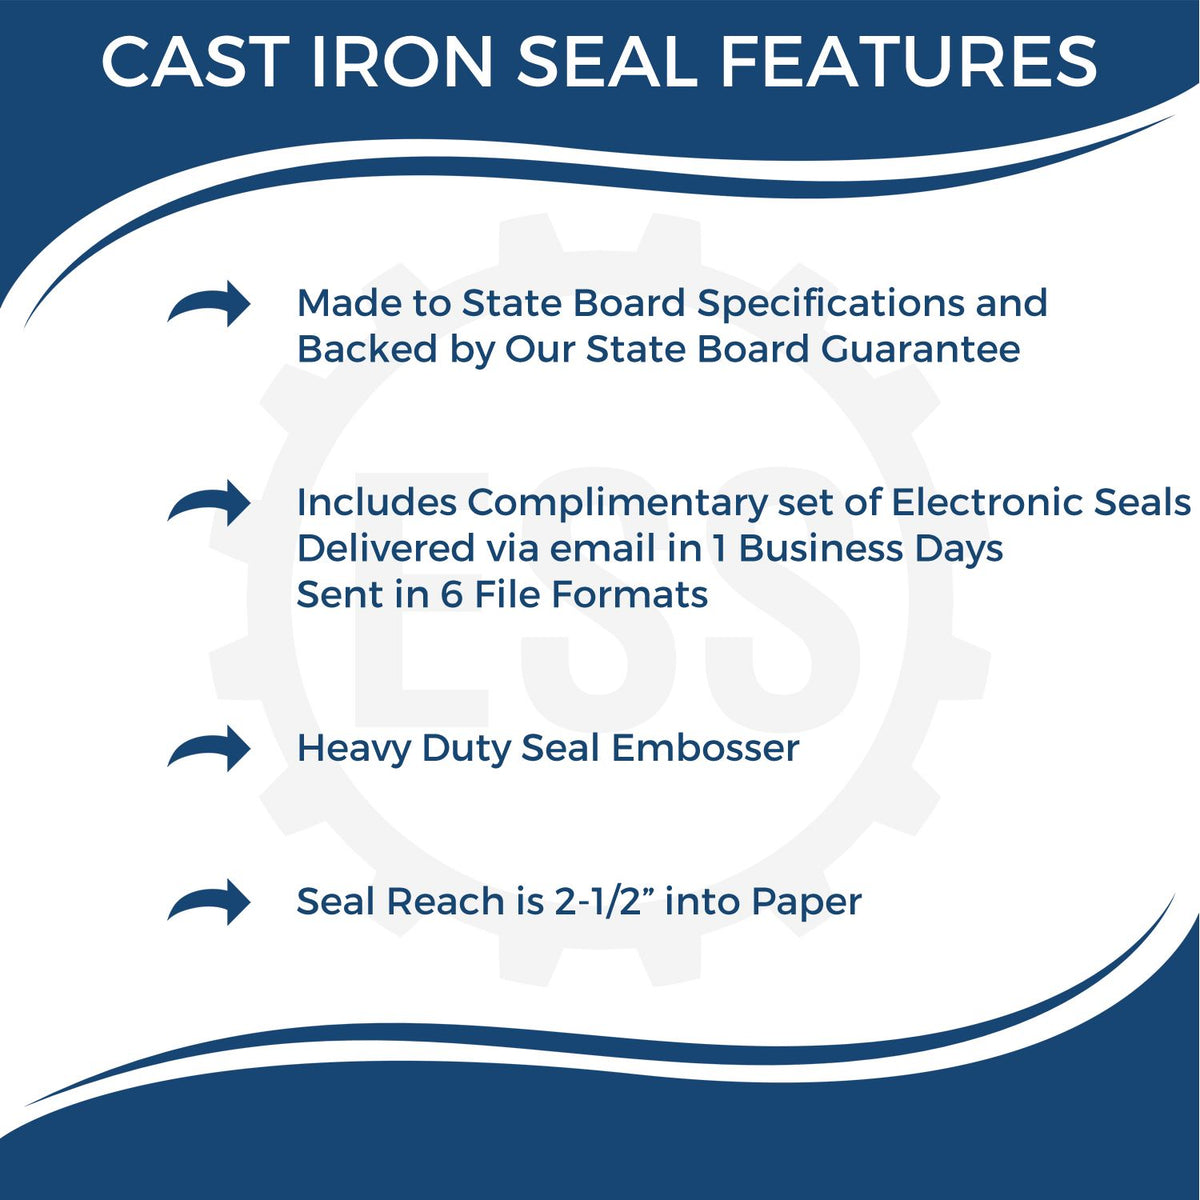 A picture of an infographic highlighting the selling points for the Heavy Duty Cast Iron Kansas Architect Embosser